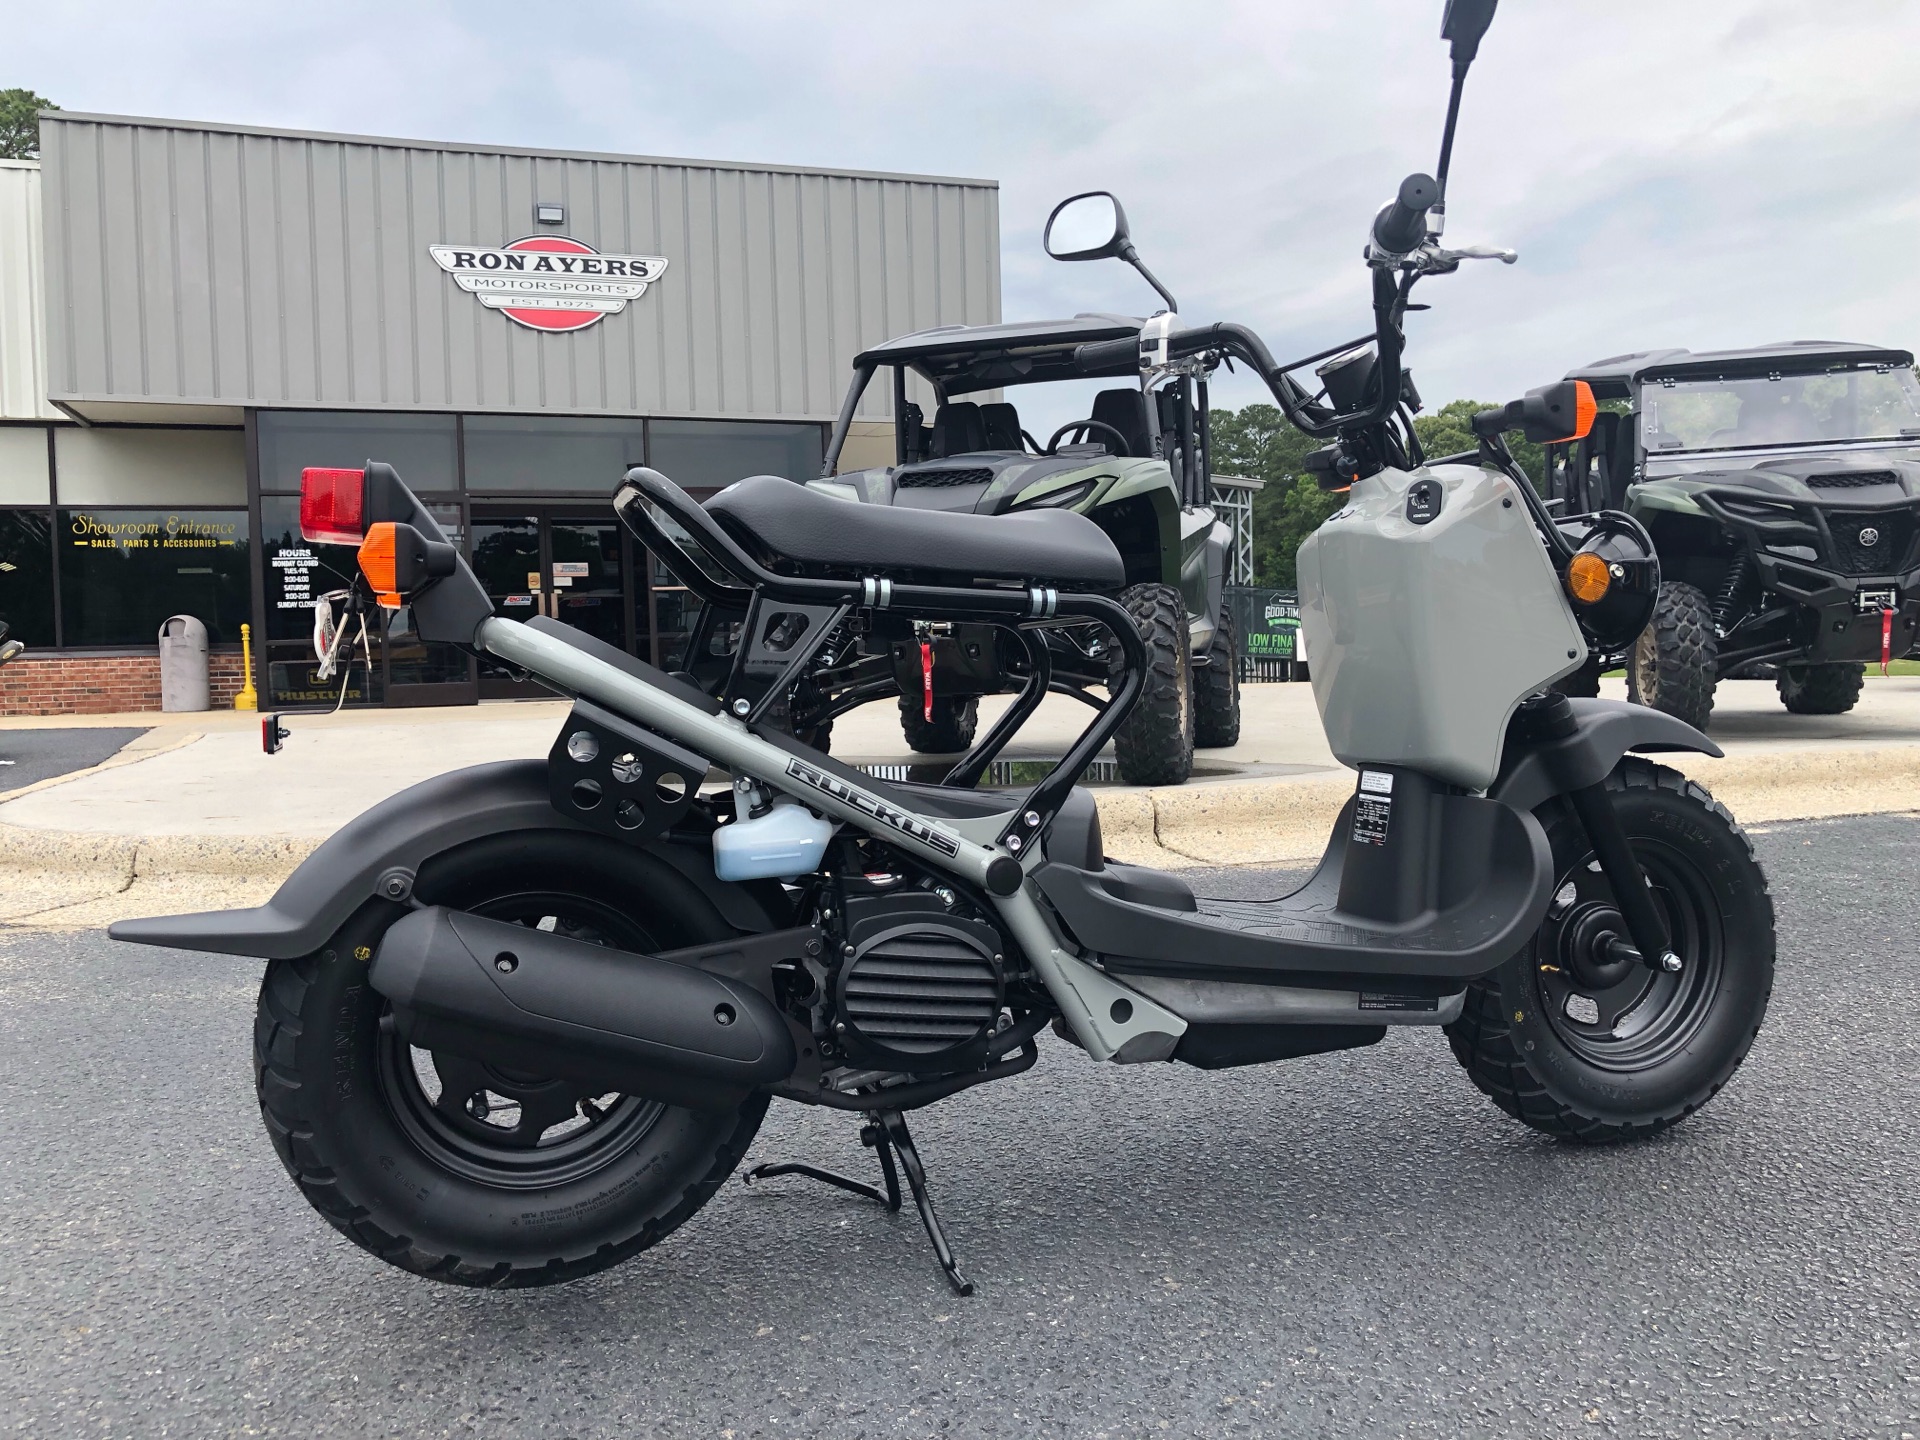 New 2022 Scooters Greenville, NC | Stock N/A